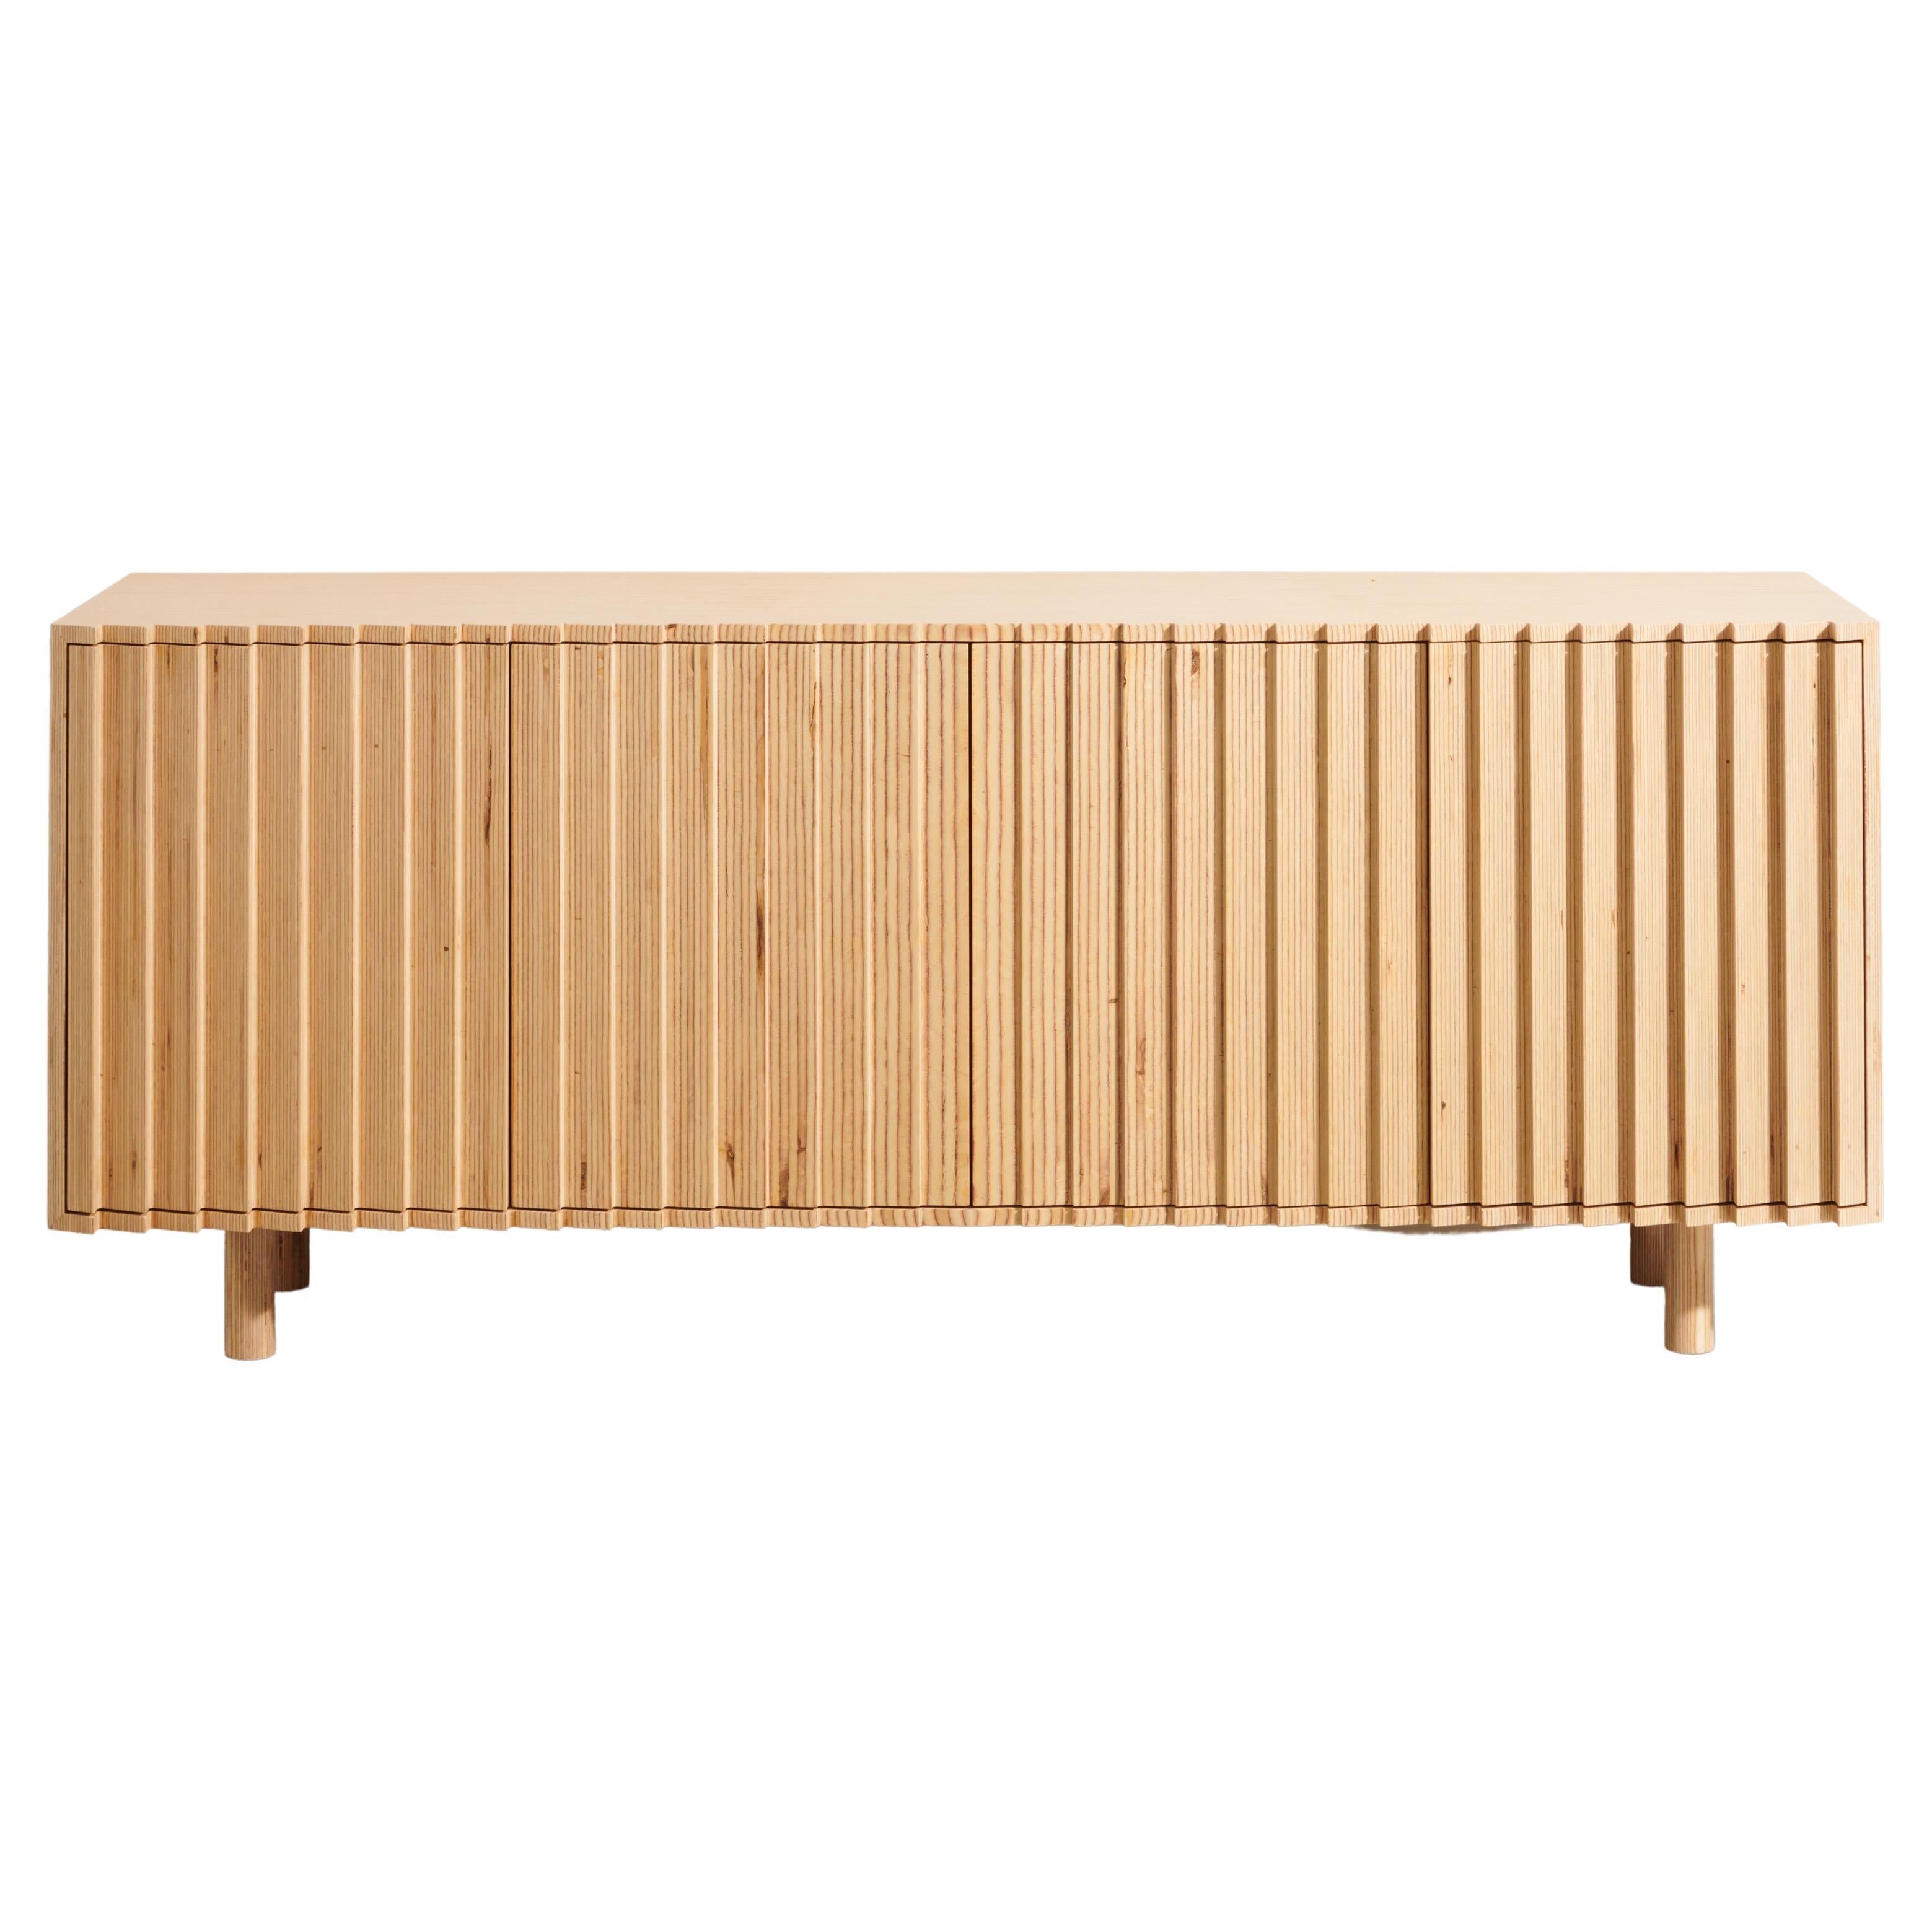 Stack Fresnel Credenza by Timbur, Represented by Tuleste Factory